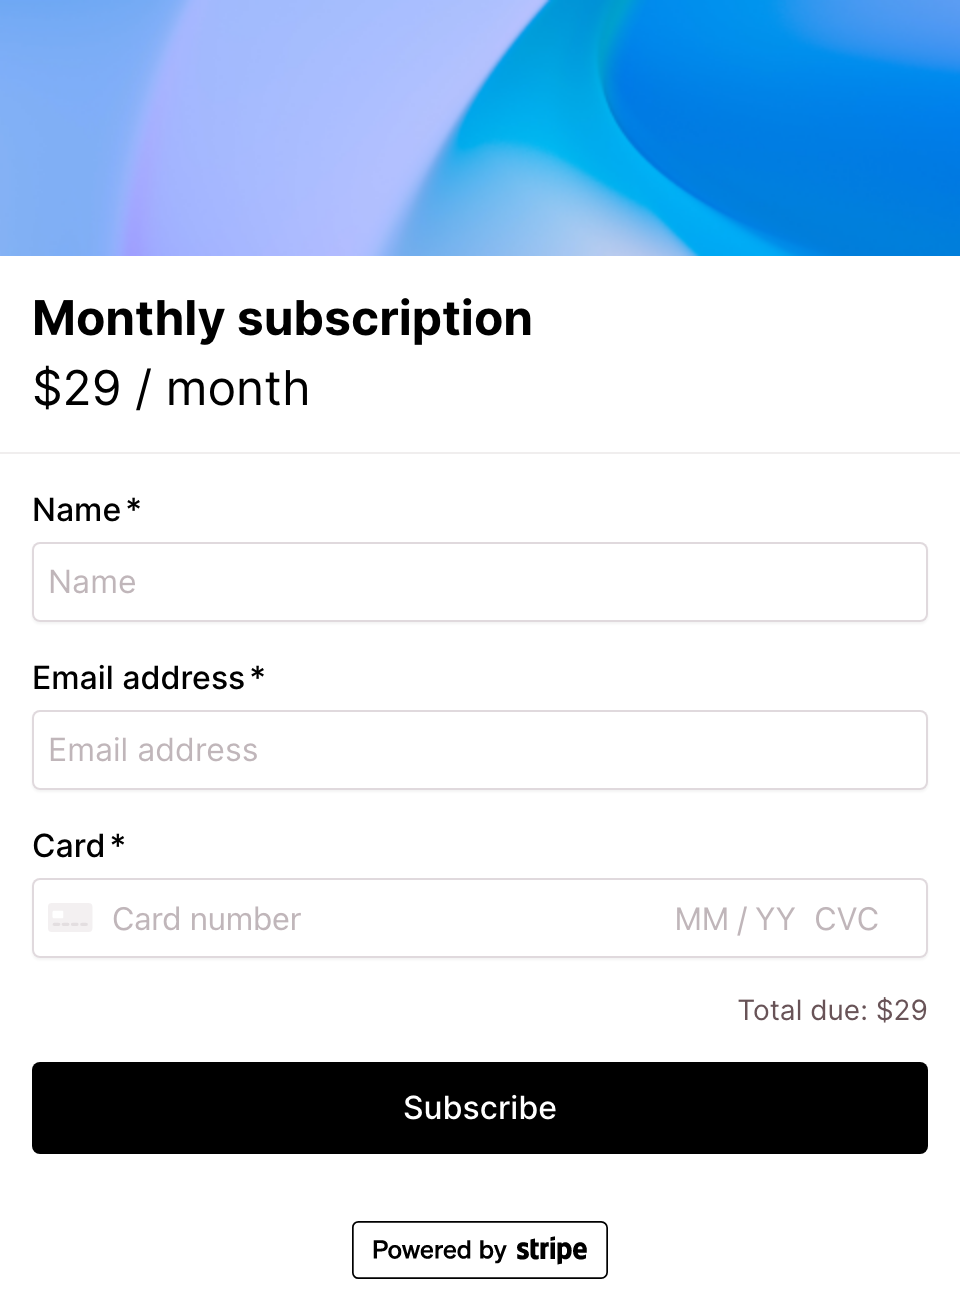 Monthly subscription checkout form